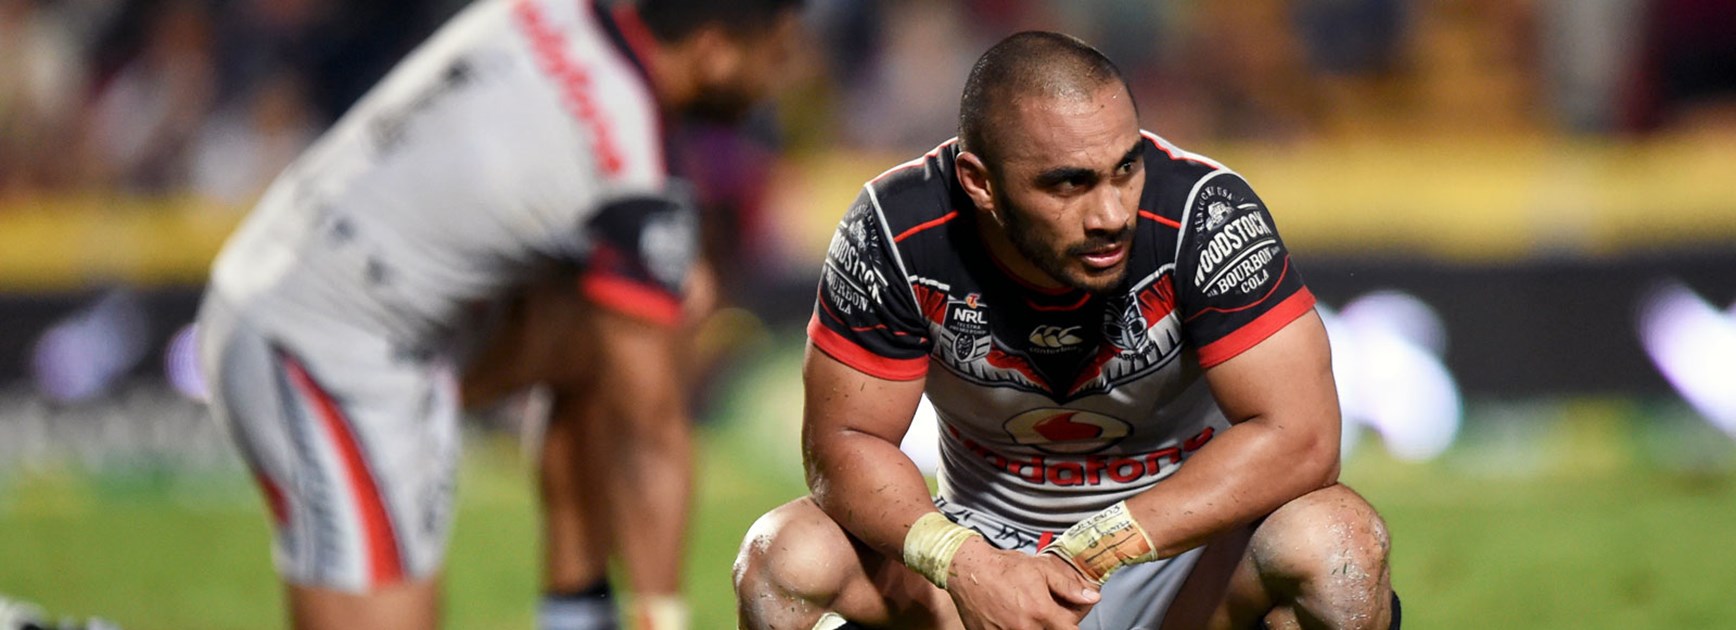 Thomas Leuluai says his side are going back to basics ahead of their Round 25 clash with Wests Tigers.